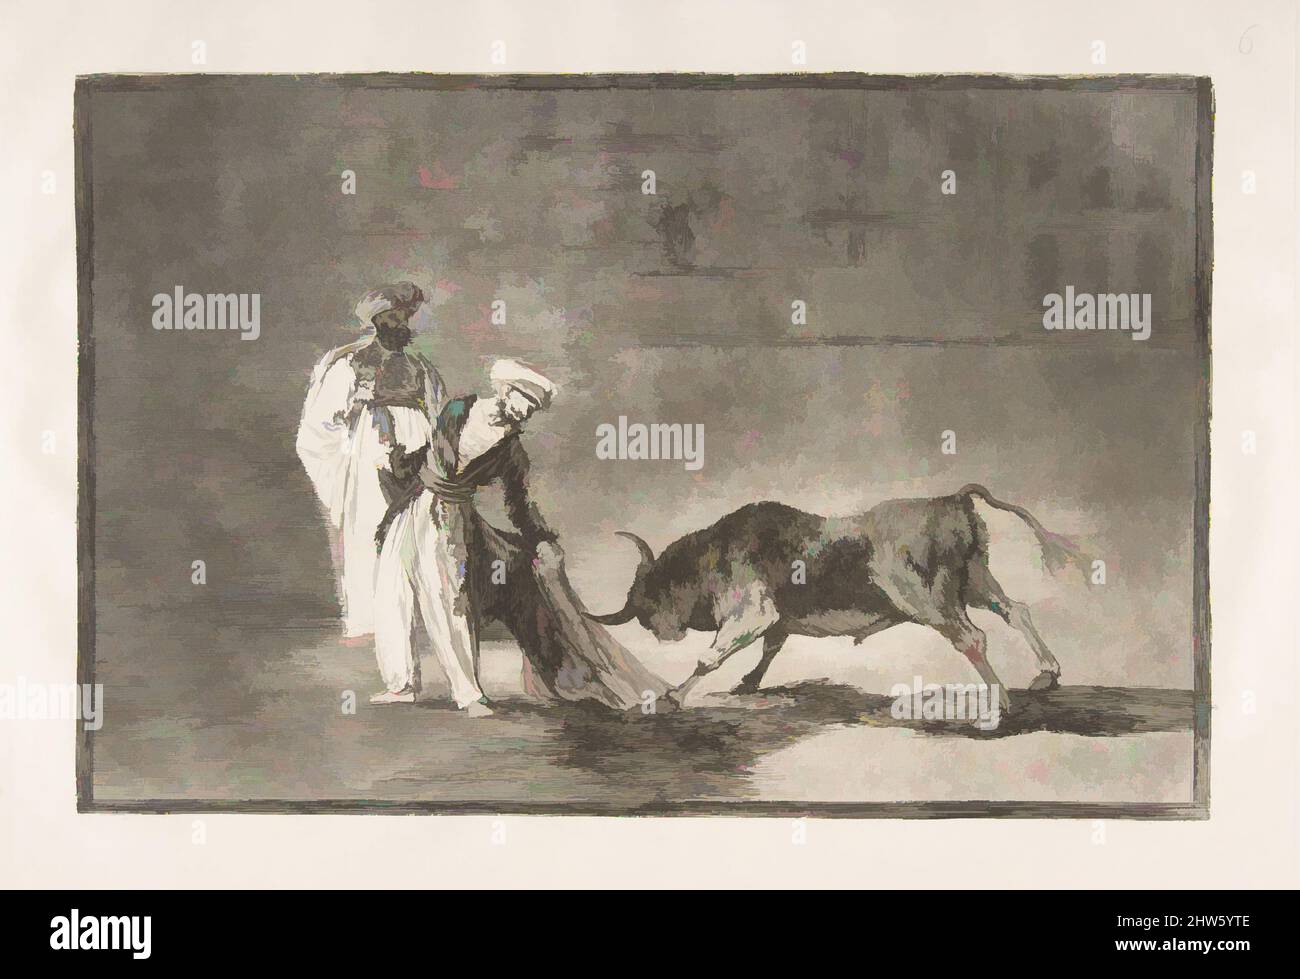 Art inspired by Plate 6 from 'The Tauromaquia':The Moors make a different play in the ring calling the bull with their burnous., 1816, Etching, burnished aquatint and drypoint, Plate: 9 5/8 x 13 3/4 in. (24.5 x 35 cm), Prints, Goya (Francisco de Goya y Lucientes) (Spanish, Fuendetodos, Classic works modernized by Artotop with a splash of modernity. Shapes, color and value, eye-catching visual impact on art. Emotions through freedom of artworks in a contemporary way. A timeless message pursuing a wildly creative new direction. Artists turning to the digital medium and creating the Artotop NFT Stock Photo